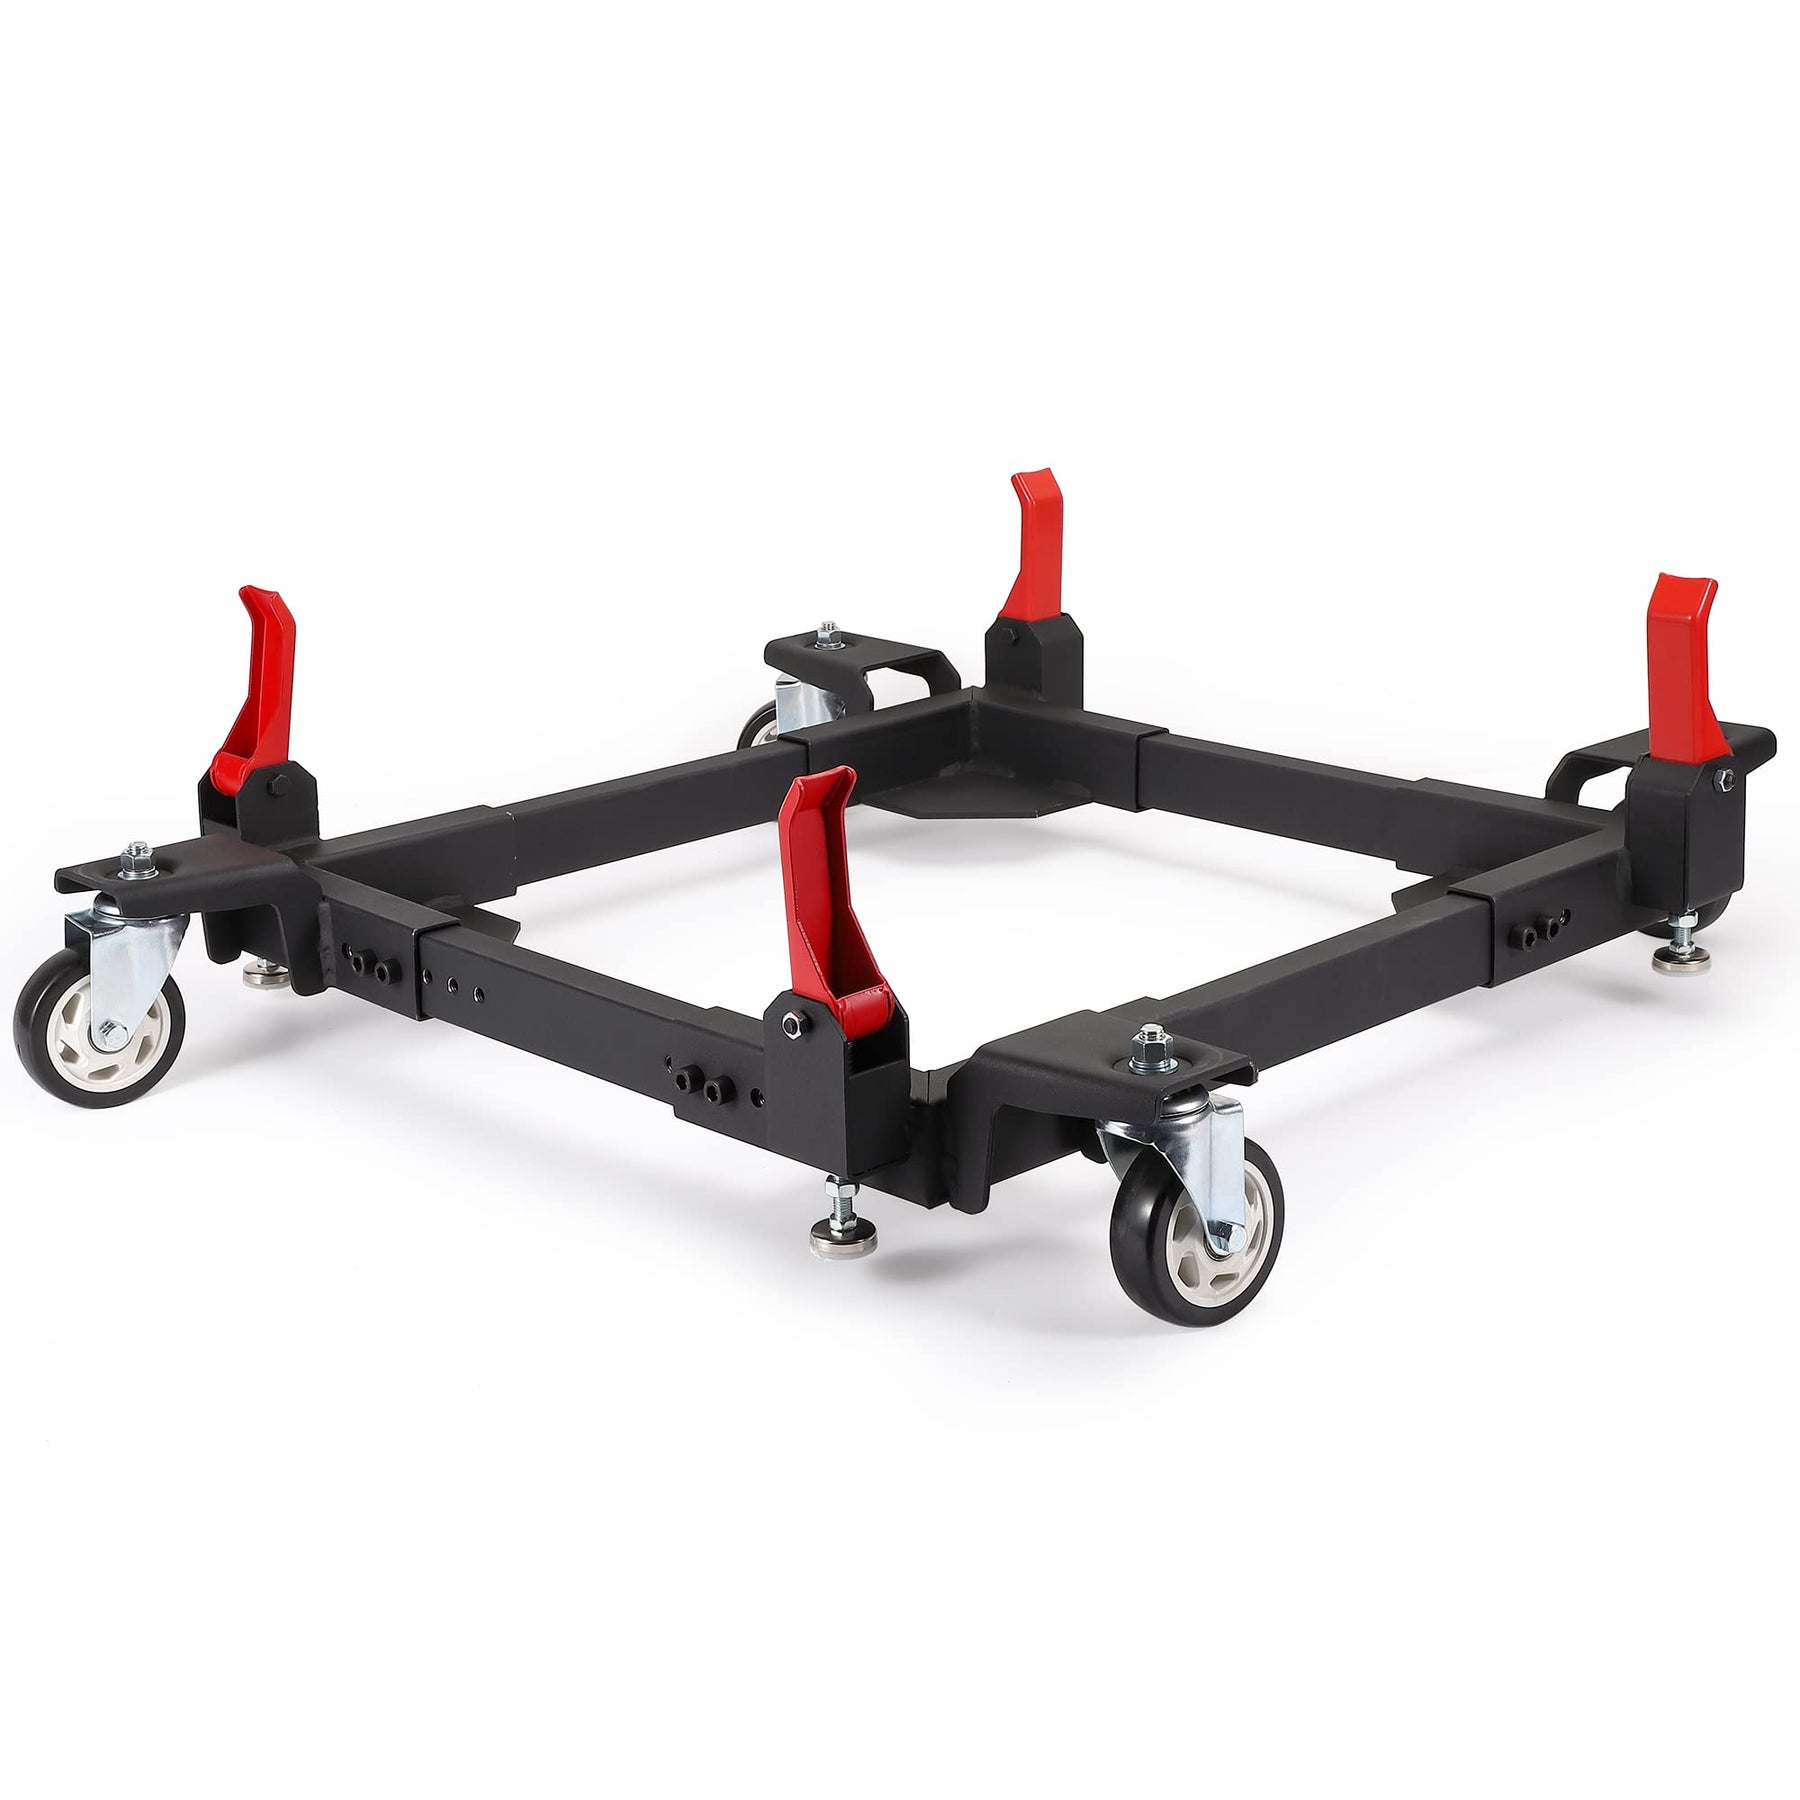 Mobile Roller Base Kit with 2 Locking Wheels, Heavy Duty Mobile Base  1550LBS Load-Bearing for Shop Equipment, Power Tools, Machines,  Refrigerators